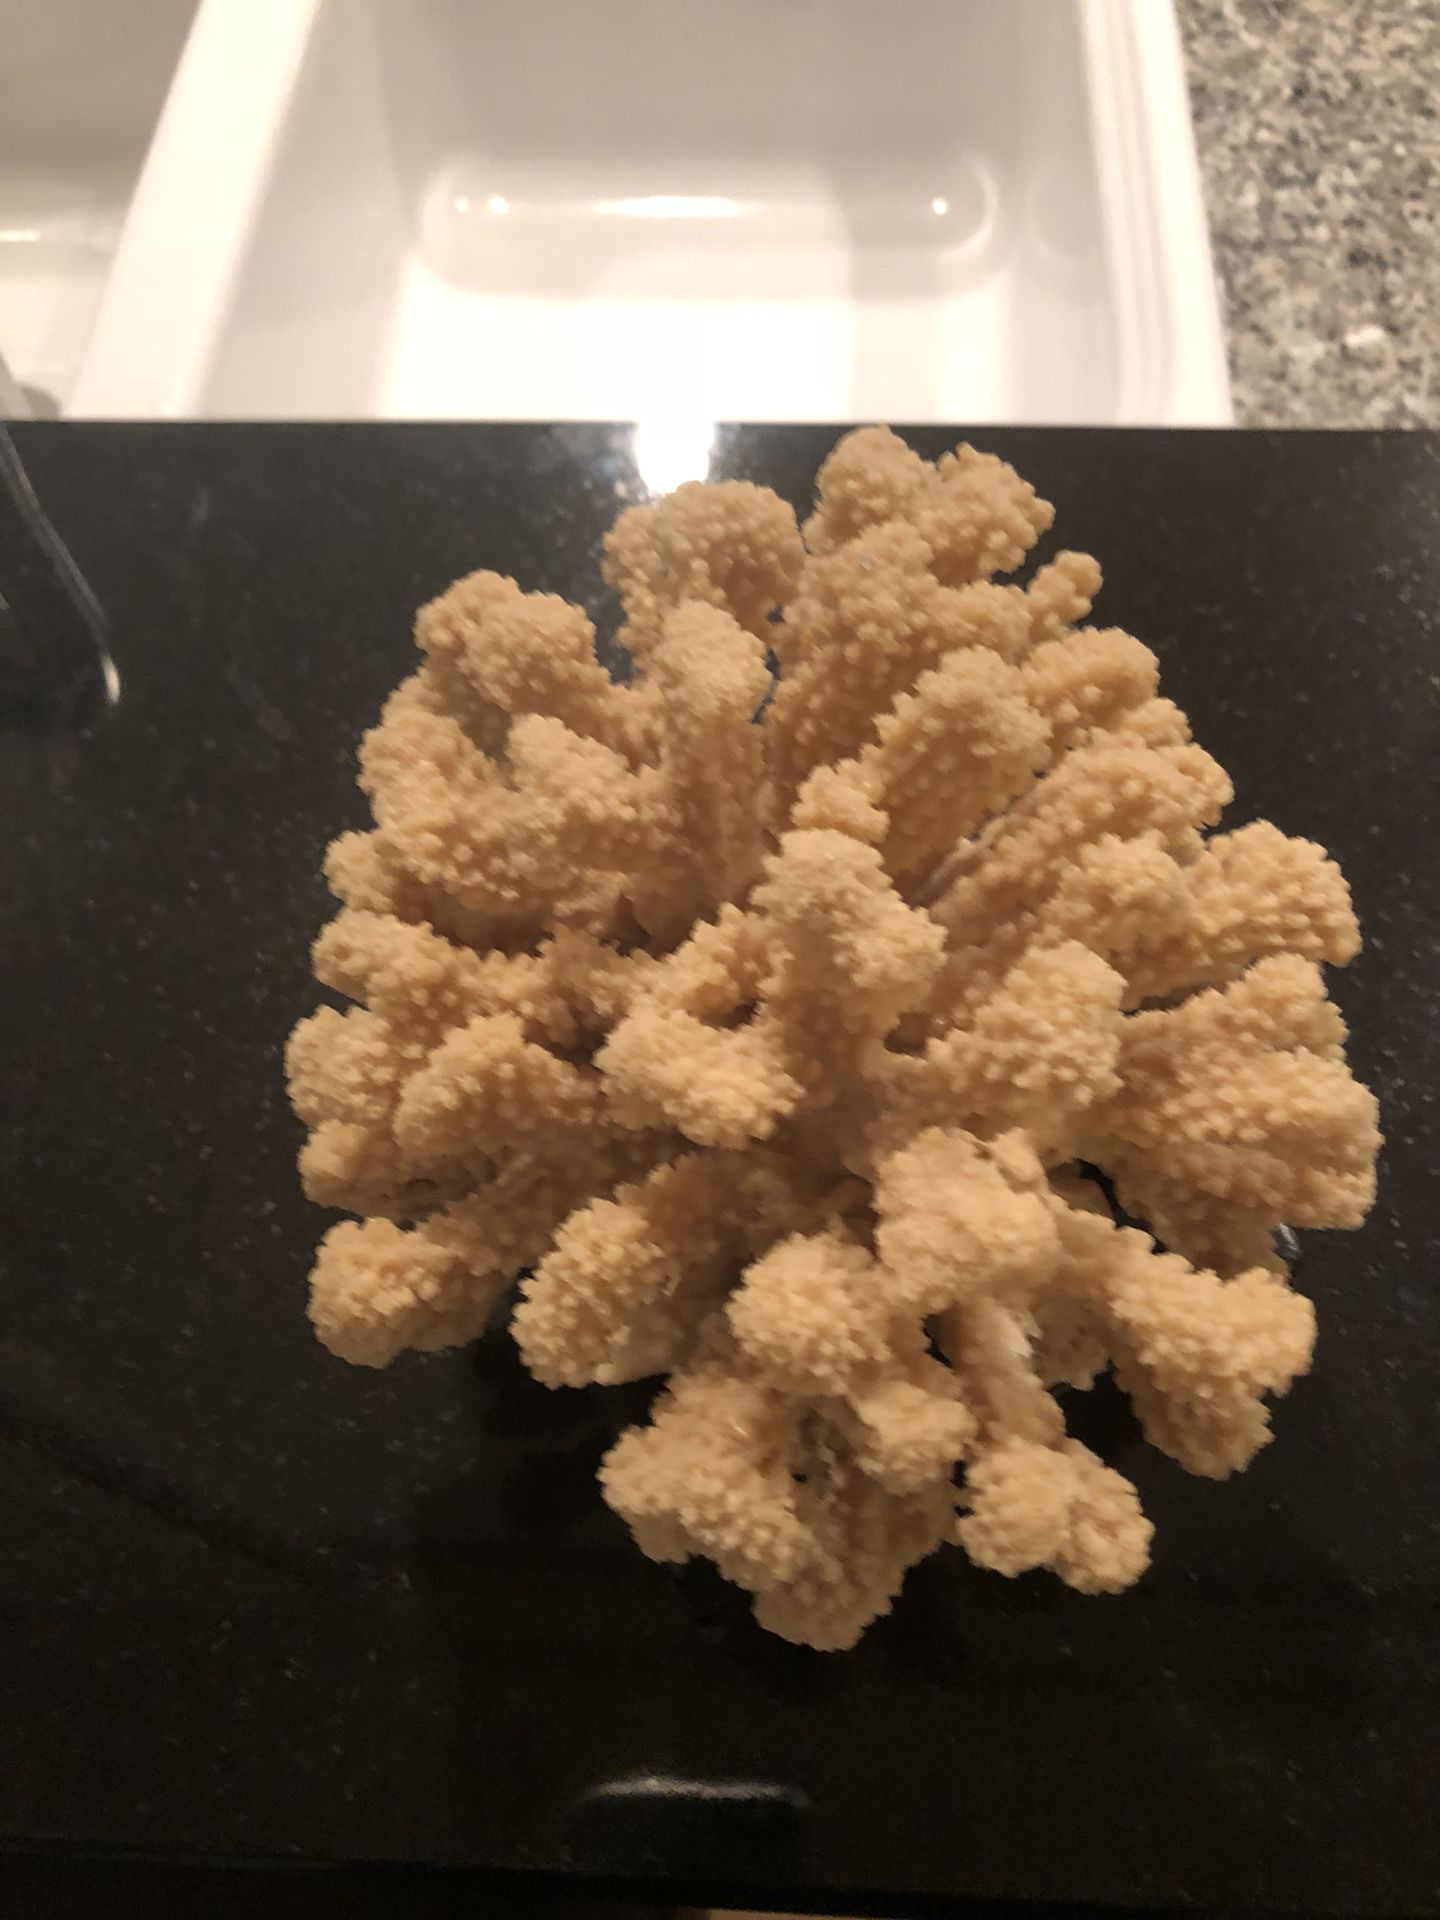 Coral on a black base